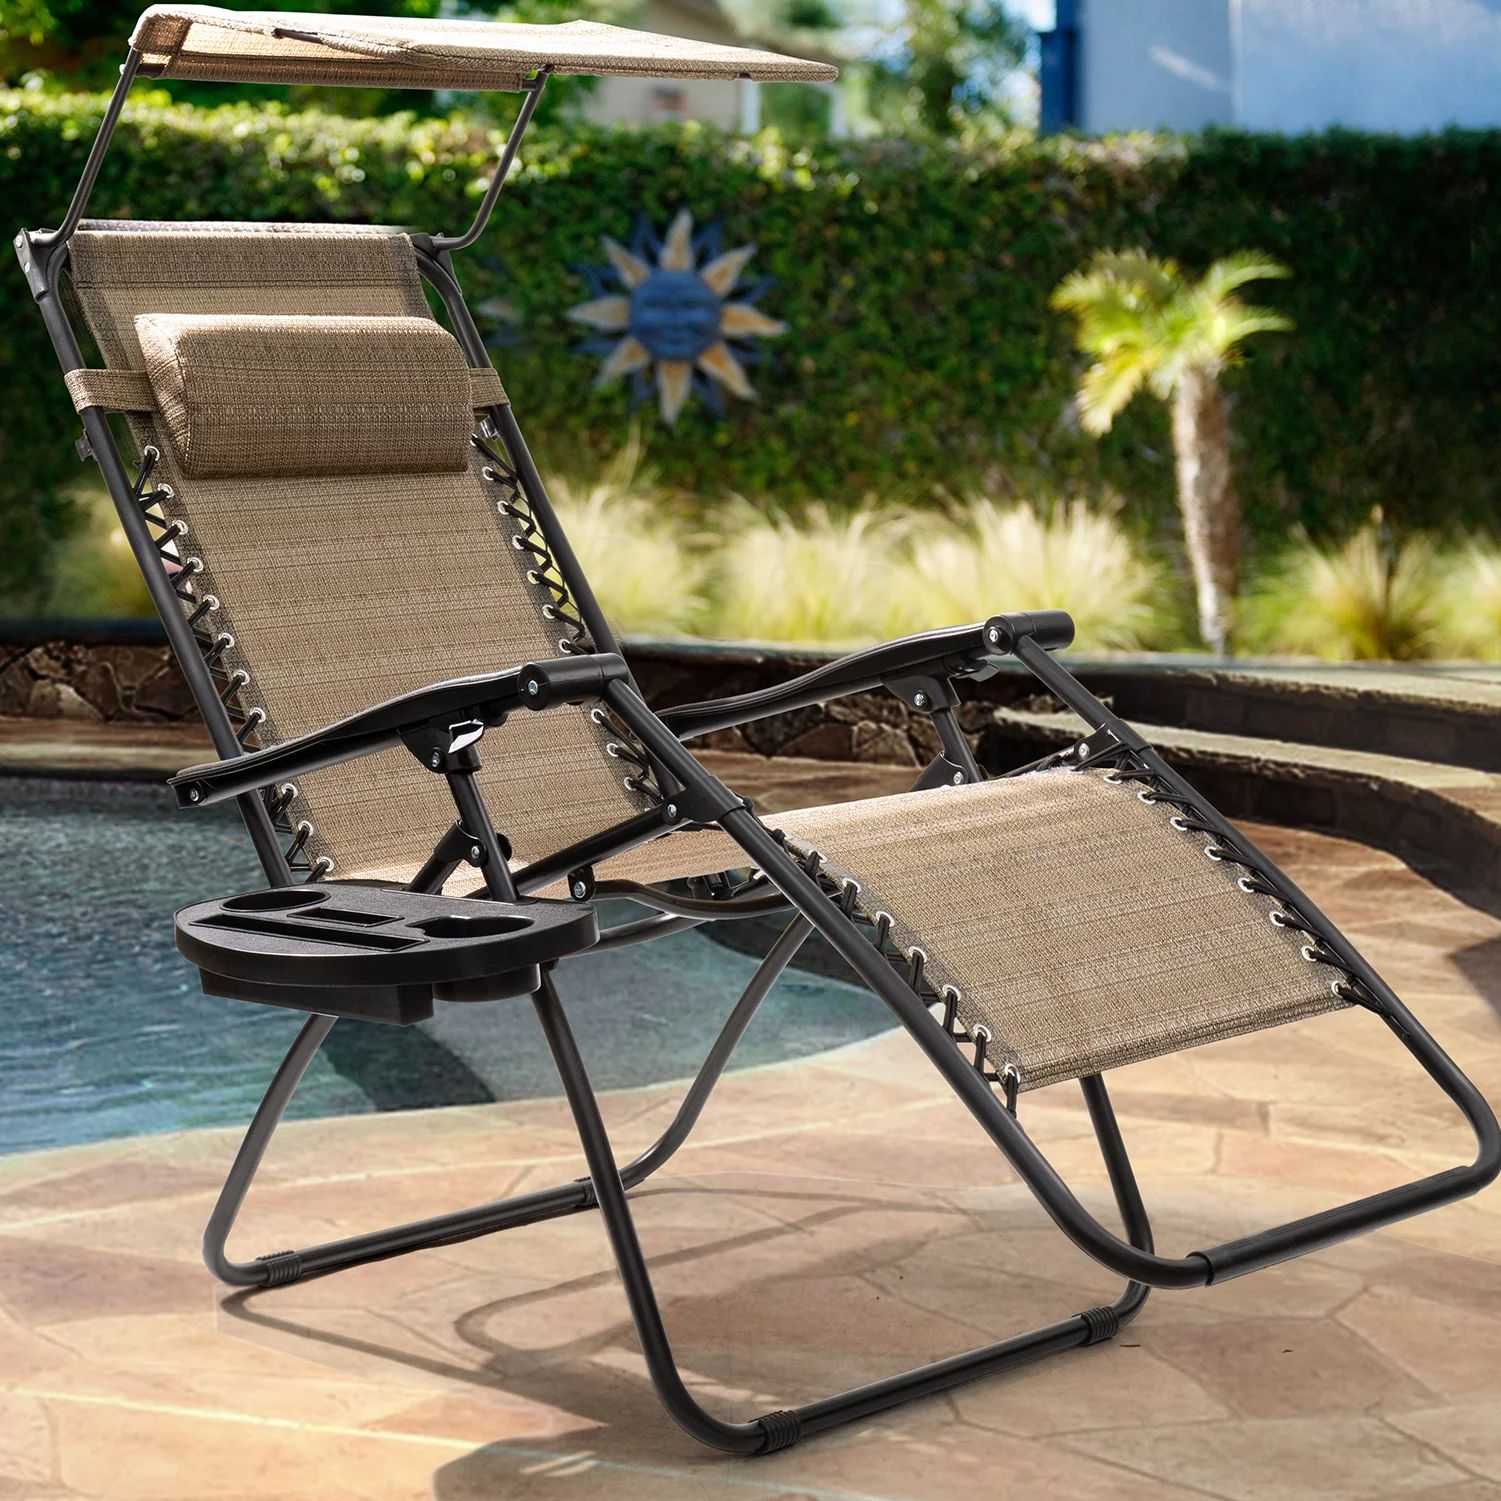 Walnew Zero Gravity Chair Outdoor Folding Recliner Lounge Chair with Attachable Sunshade Canopy a... | Walmart (US)